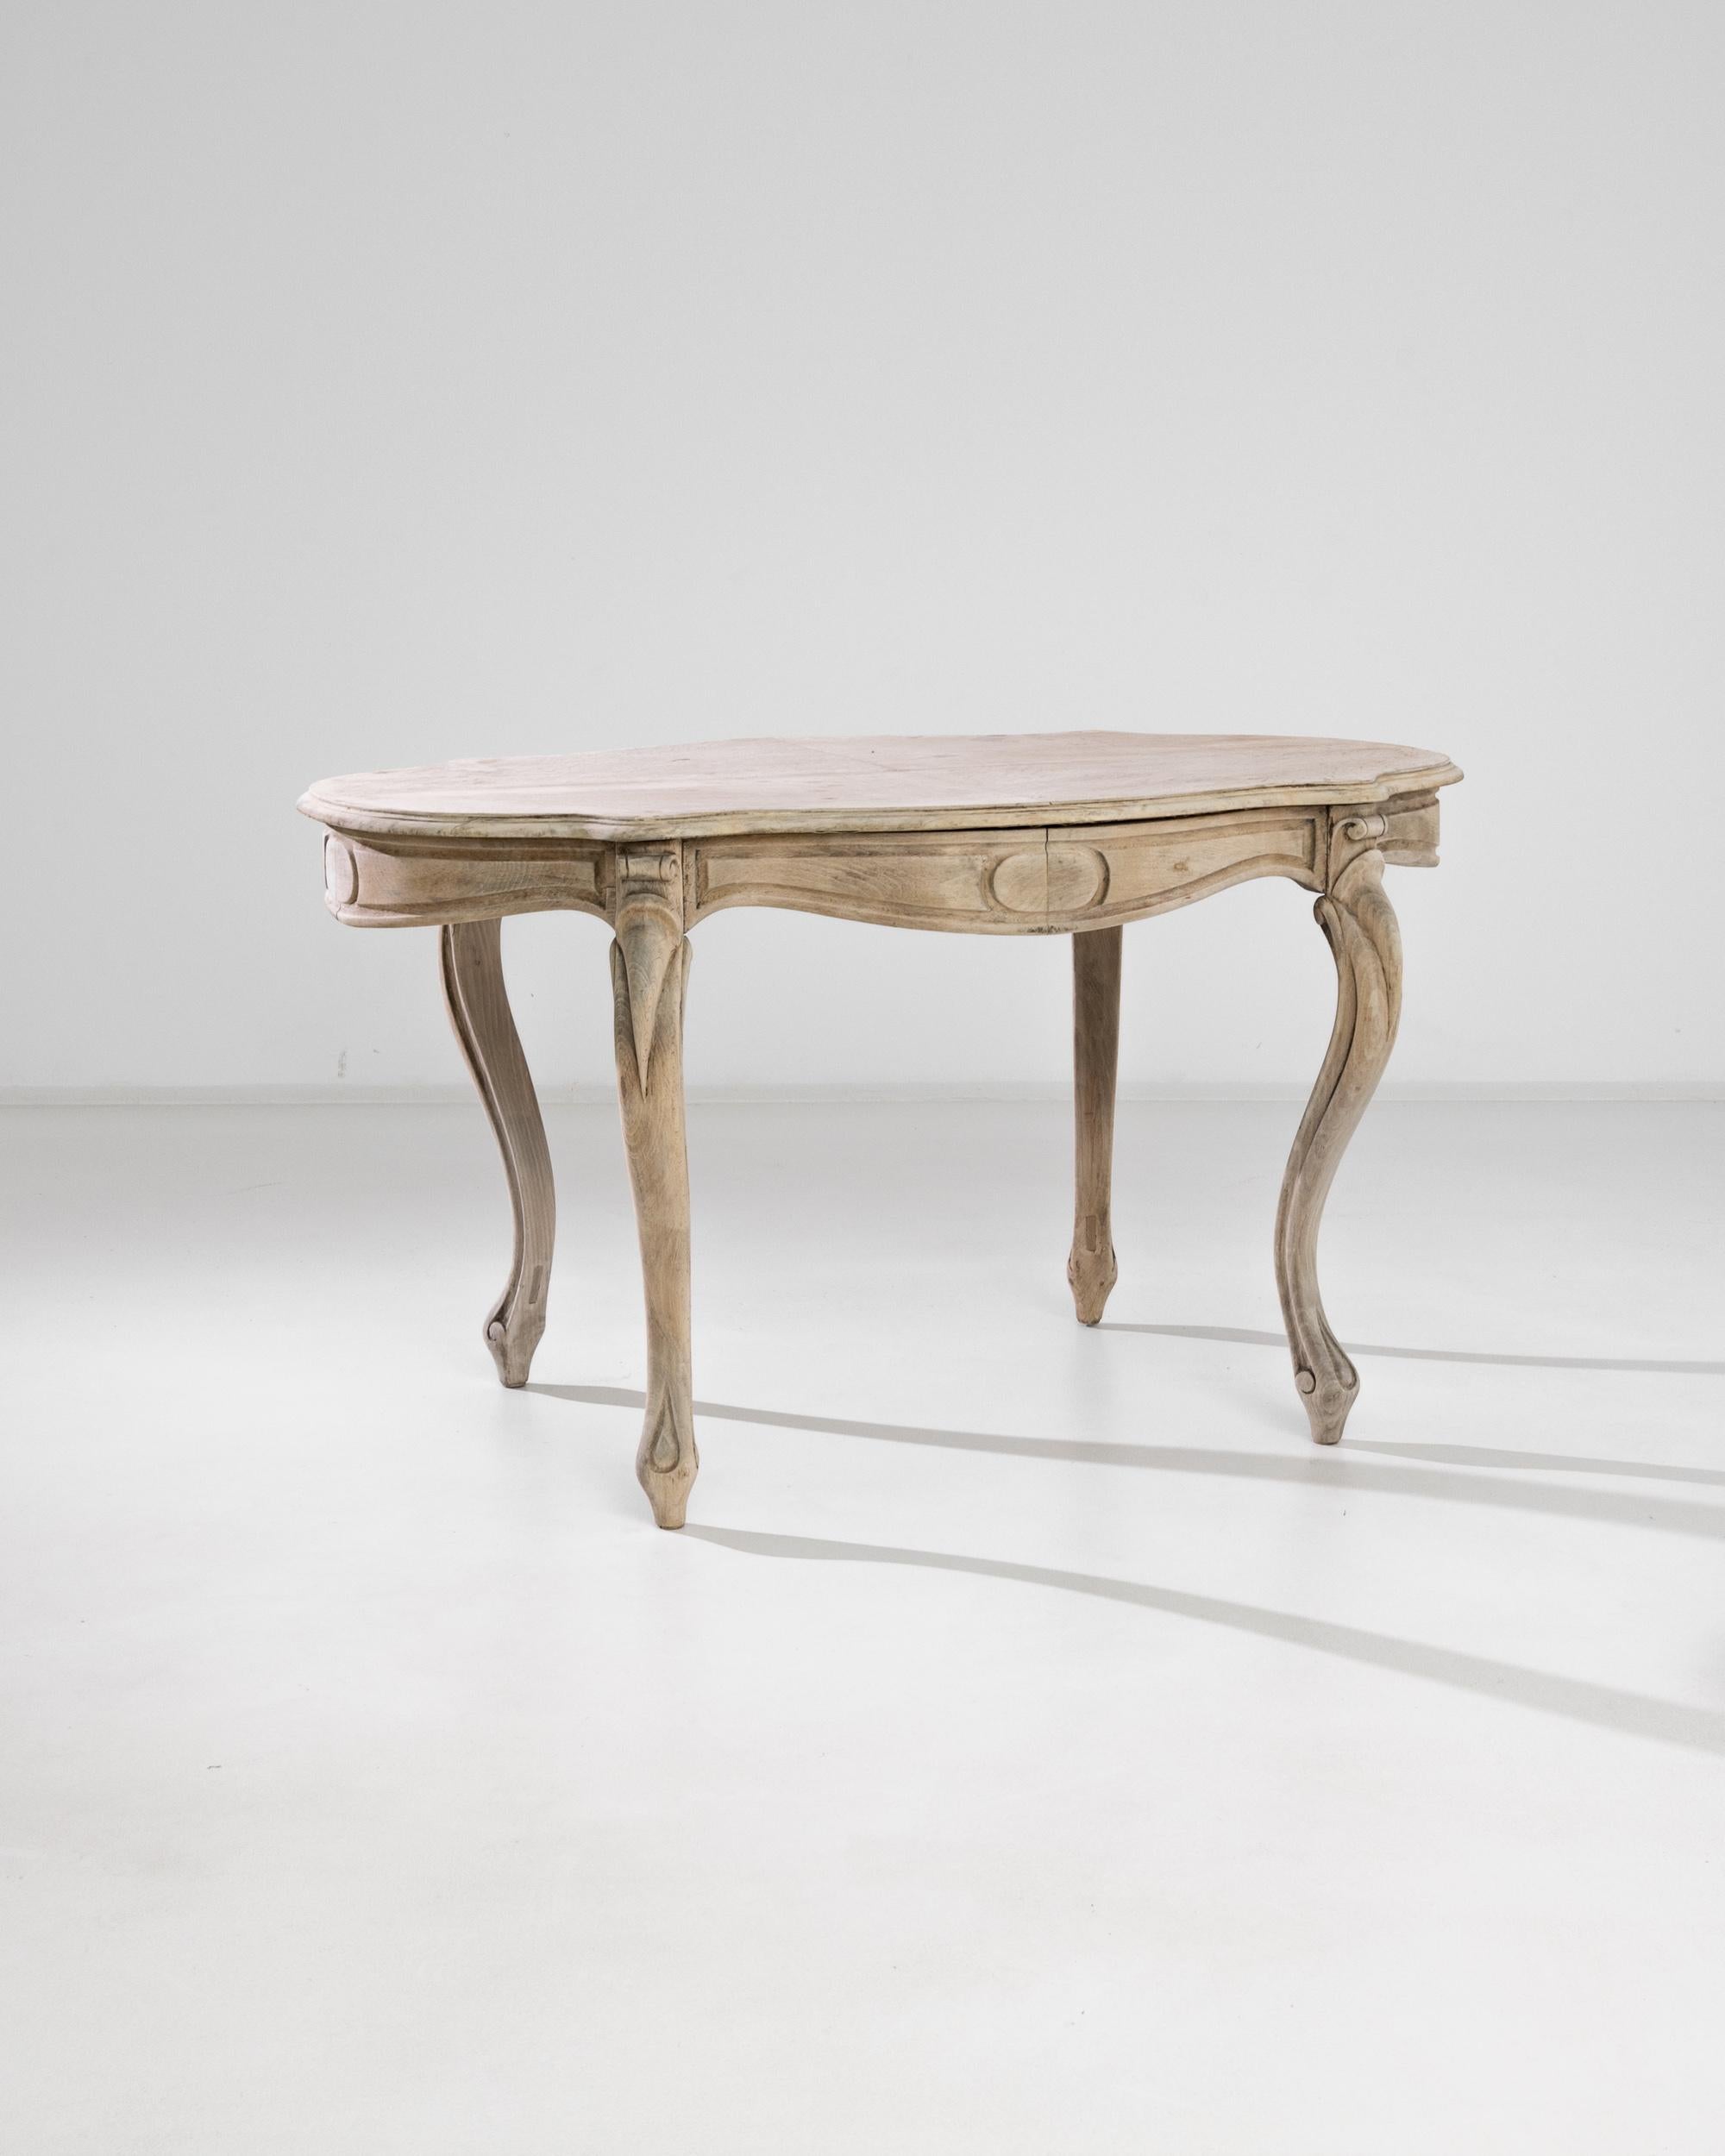 This beech table was made in France circa 1880. It adopts a peculiar shape due to the well-pronounced curvature of the cabriole legs decorated with elaborate carvings. The upper part is connected to the modestly ornamented apron with bold scrollwork